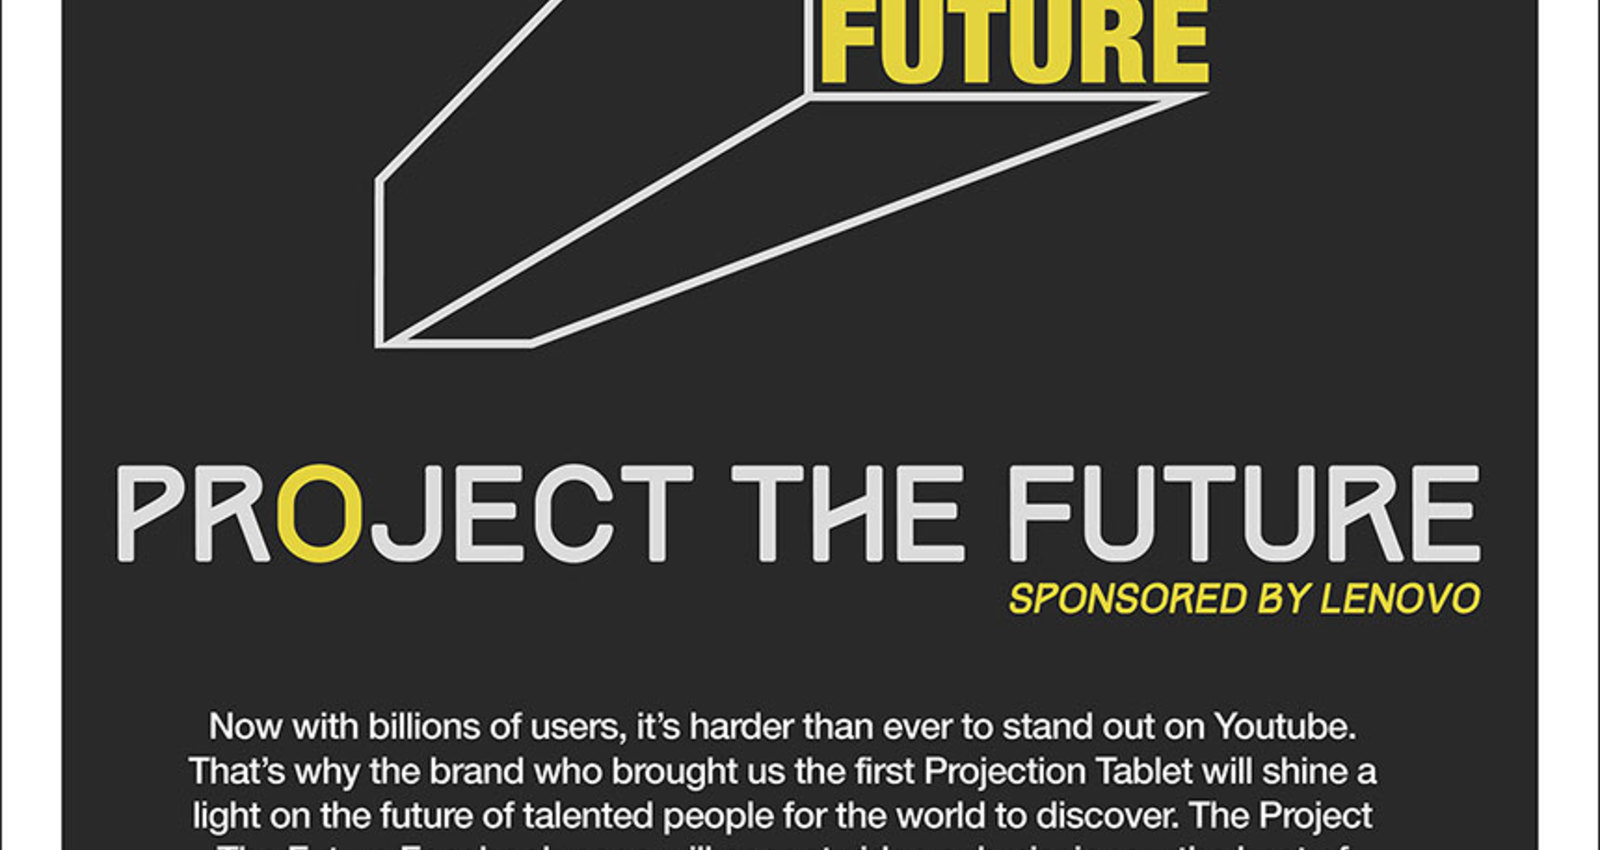 Project The Future